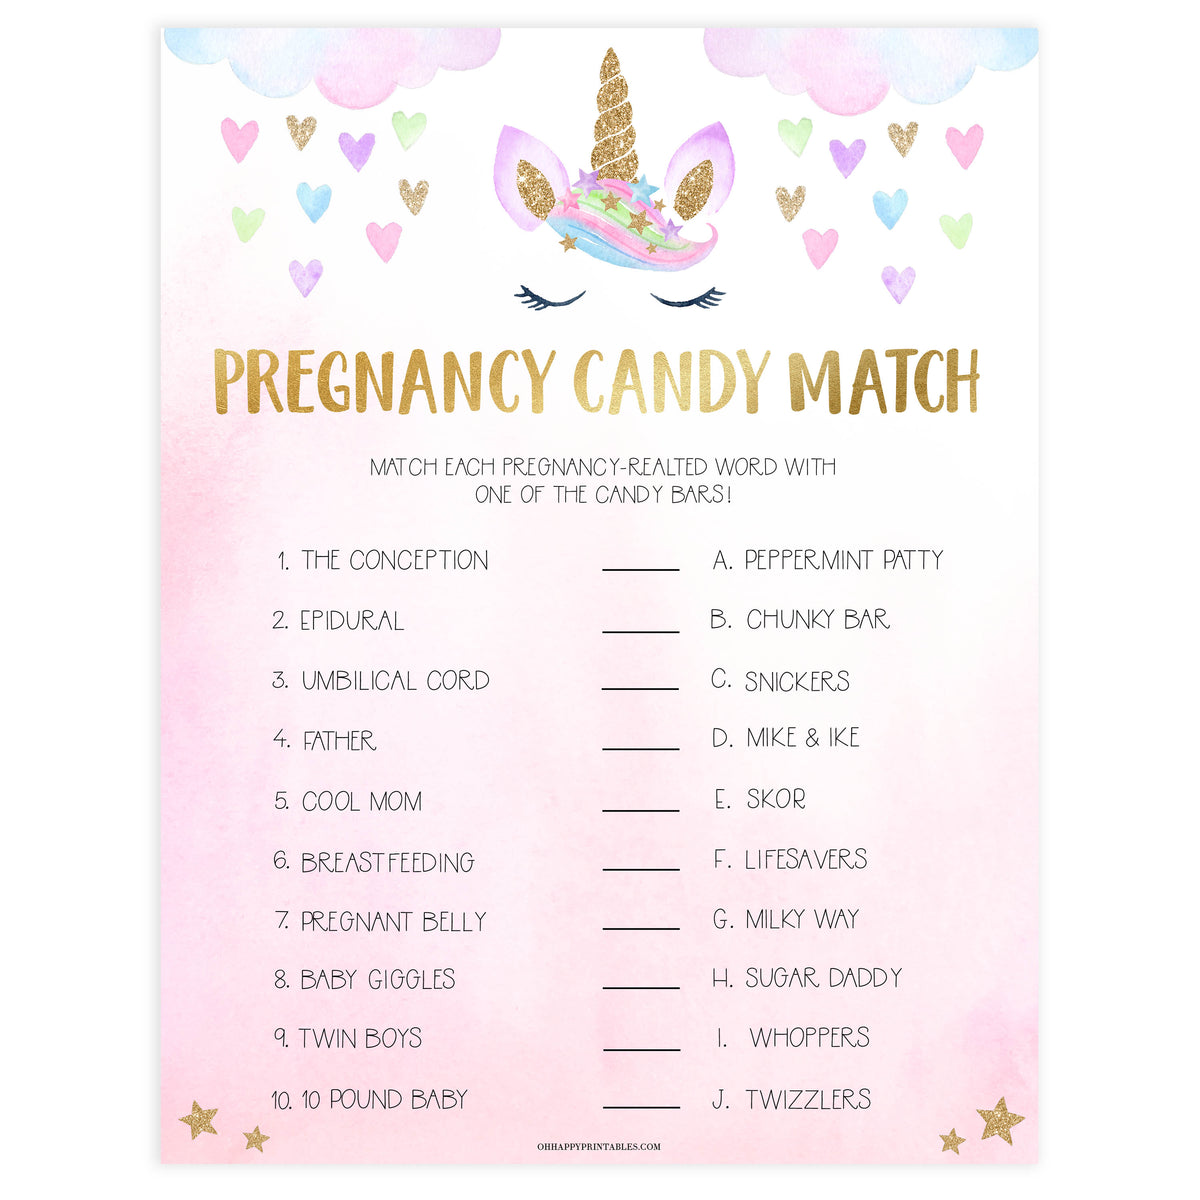 pregnancy candy match game, Printable baby shower games, unicorn baby games, baby shower games, fun baby shower ideas, top baby shower ideas, unicorn baby shower, baby shower games, fun unicorn baby shower ideas